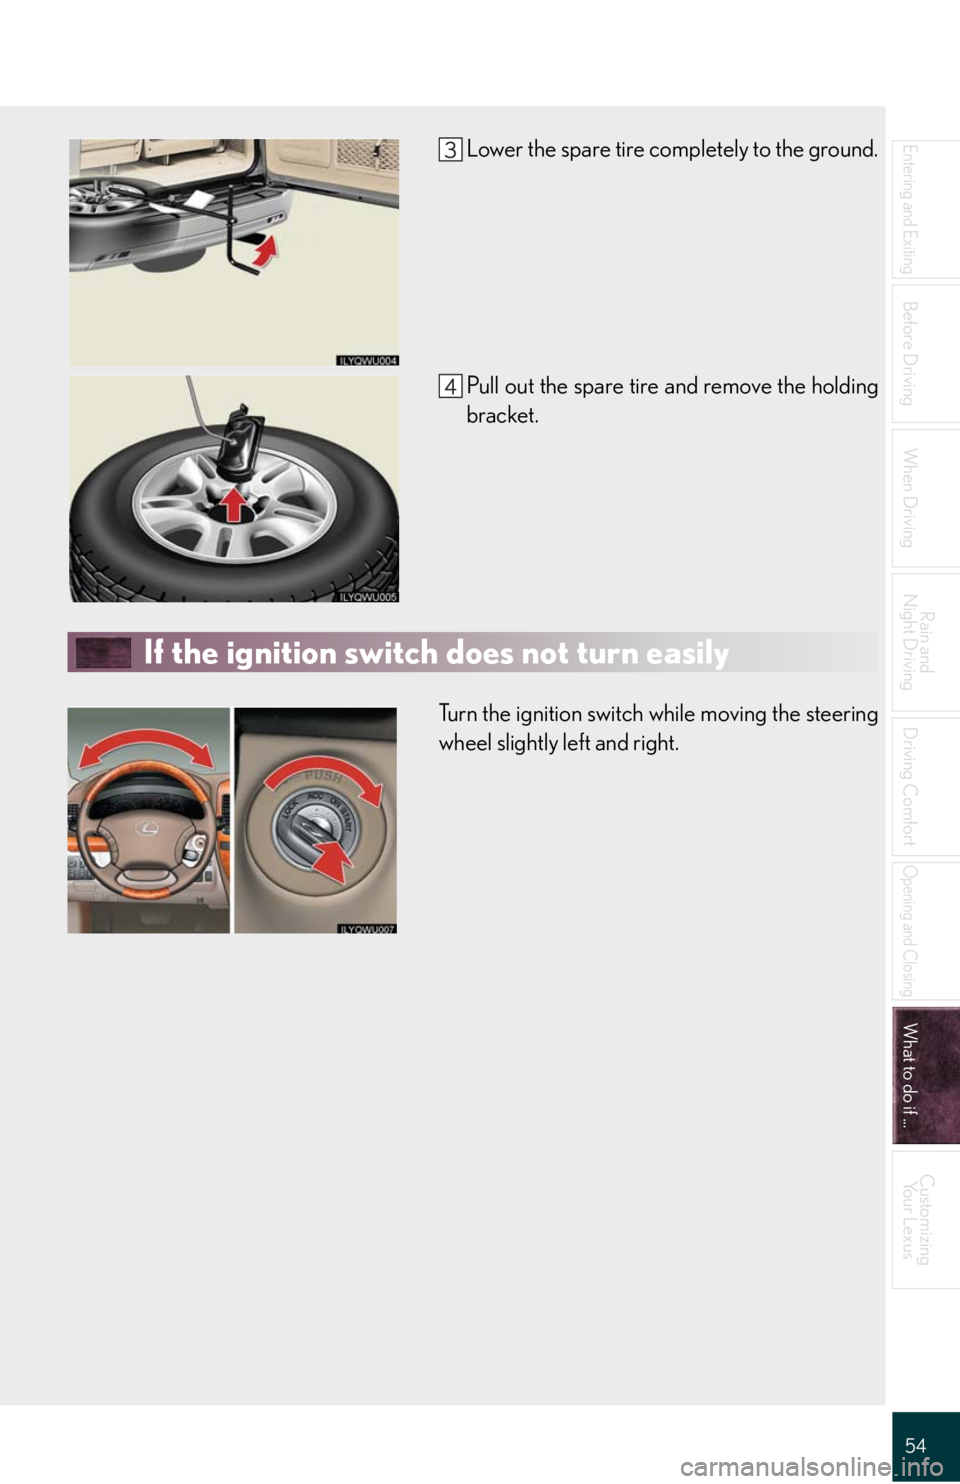 Lexus GX470 2008  Refueling / LEXUS 2008 GX470 QUICK GUIDE  (OM60D81U) Workshop Manual 54
Entering and Exiting
Before Driving
When Driving
Rain and 
Night Driving
Driving Comfort
Opening and Closing
What to do if ...
Customizing
Yo u r  L e x u s
Lower the spare tire completely to the g